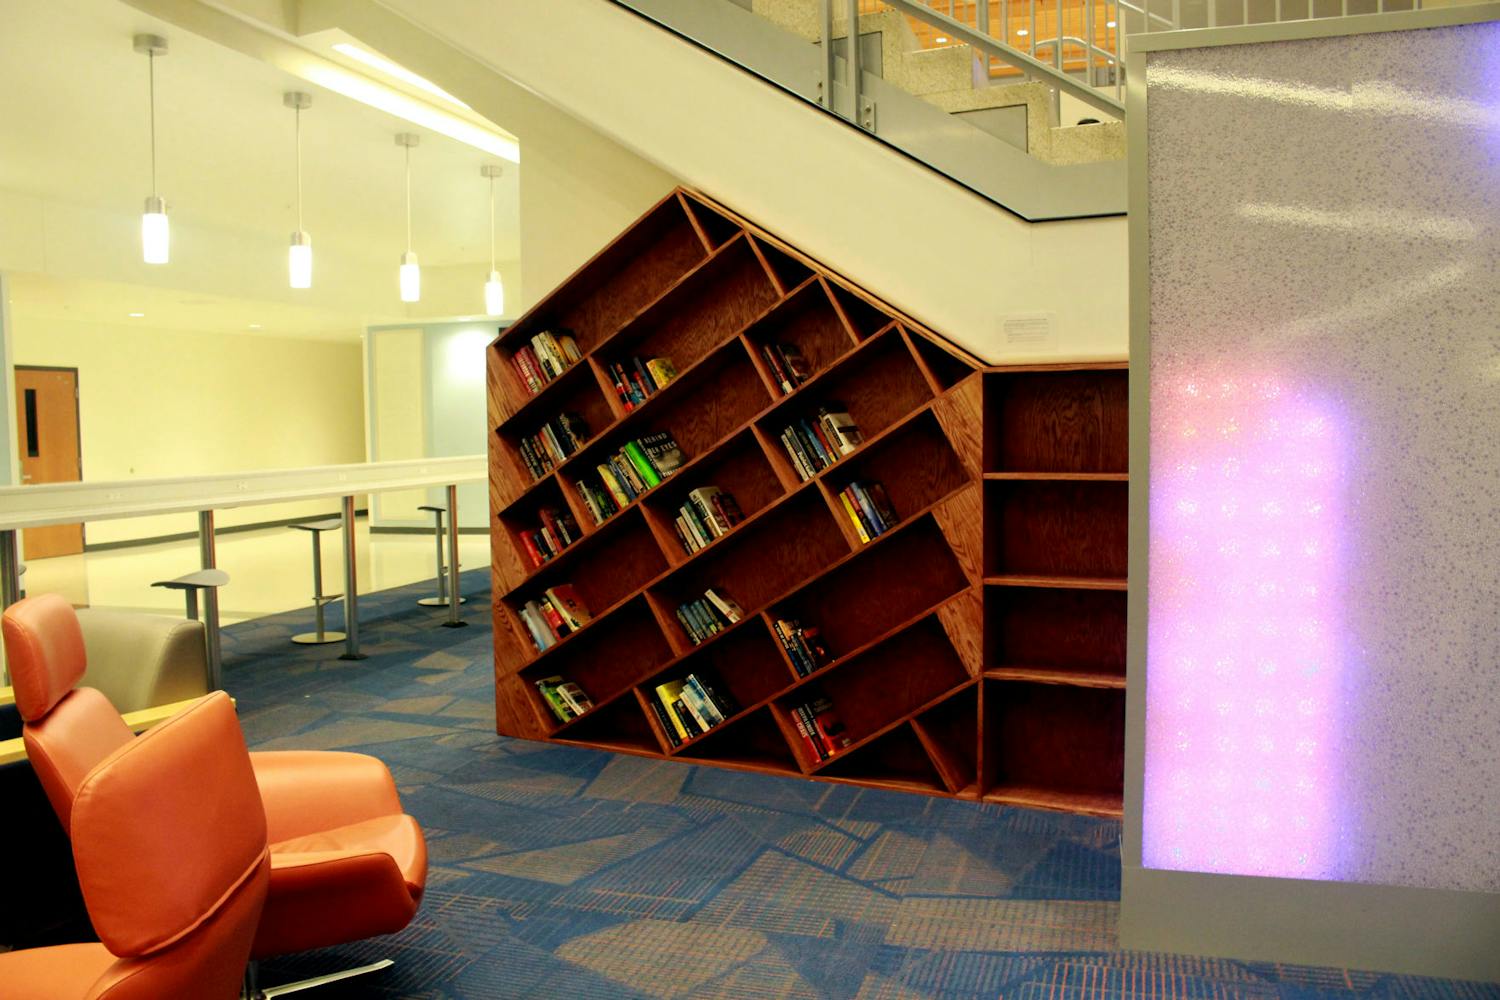 The Reitz Union’s free library opened Jan. 2 and can be used by anyone. It includes titles from authors such as Tom Clancy, Anthony Horowitz, Carl Hiaasen and James Patterson.&nbsp;